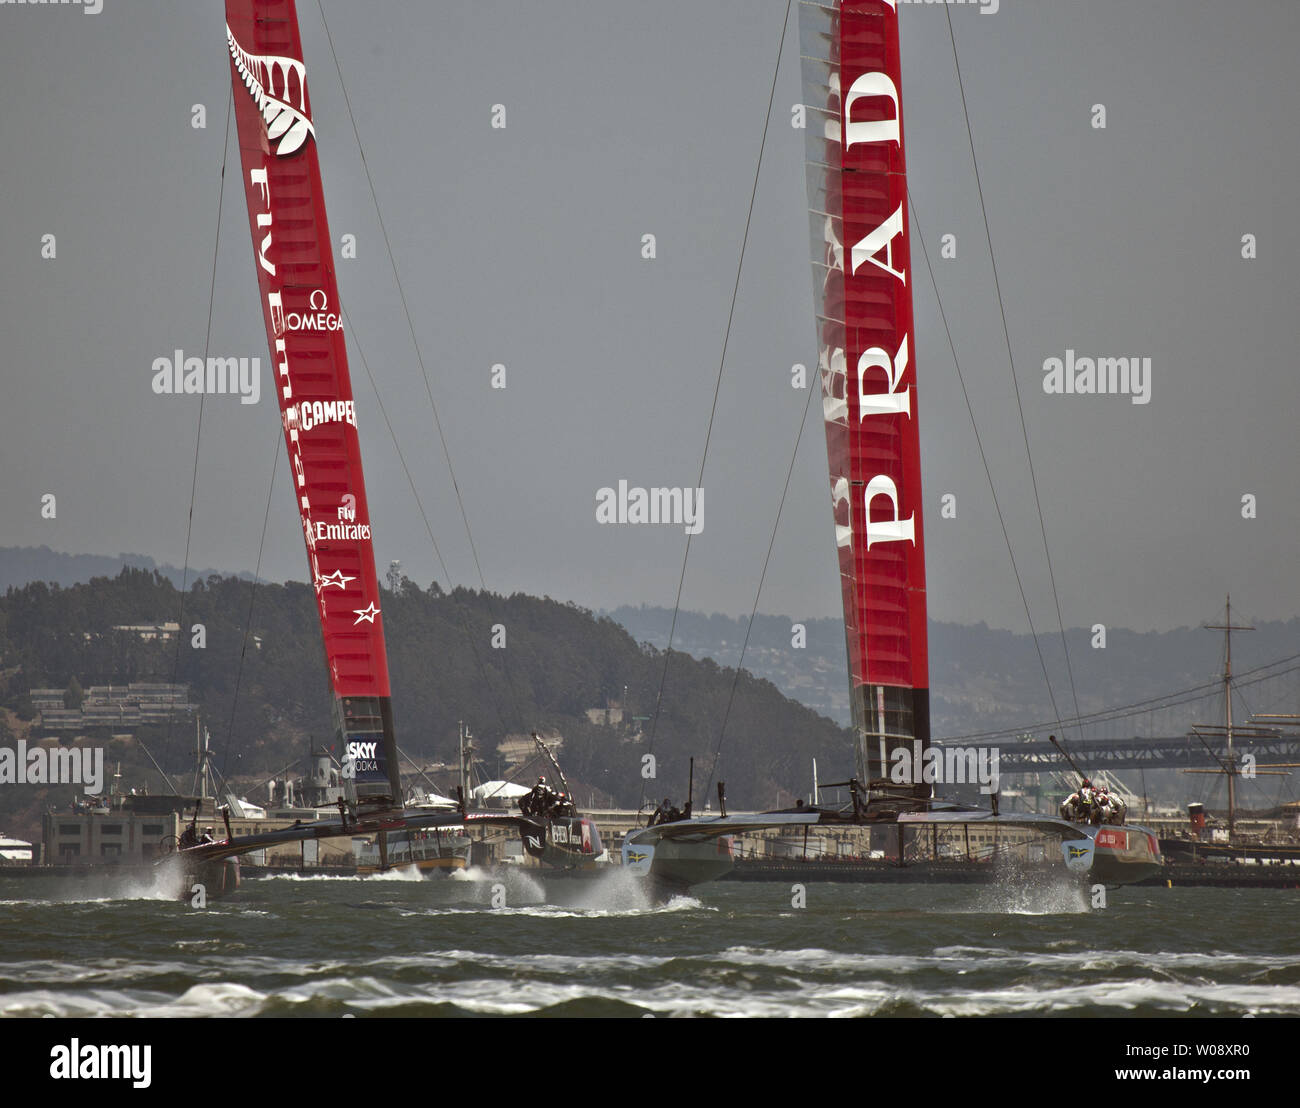 Emirates New Zealand (L) leads Italy's Luna Rossa Challenge in race five of the finals of the Louis Vuitton Cup in San Francisco Bay on August 21, 2013. The winner of the best of 13 races will face Oracle USA in the America's Cup. The Kiwis won both races of the day.   UPI/Terry Schmitt Stock Photo